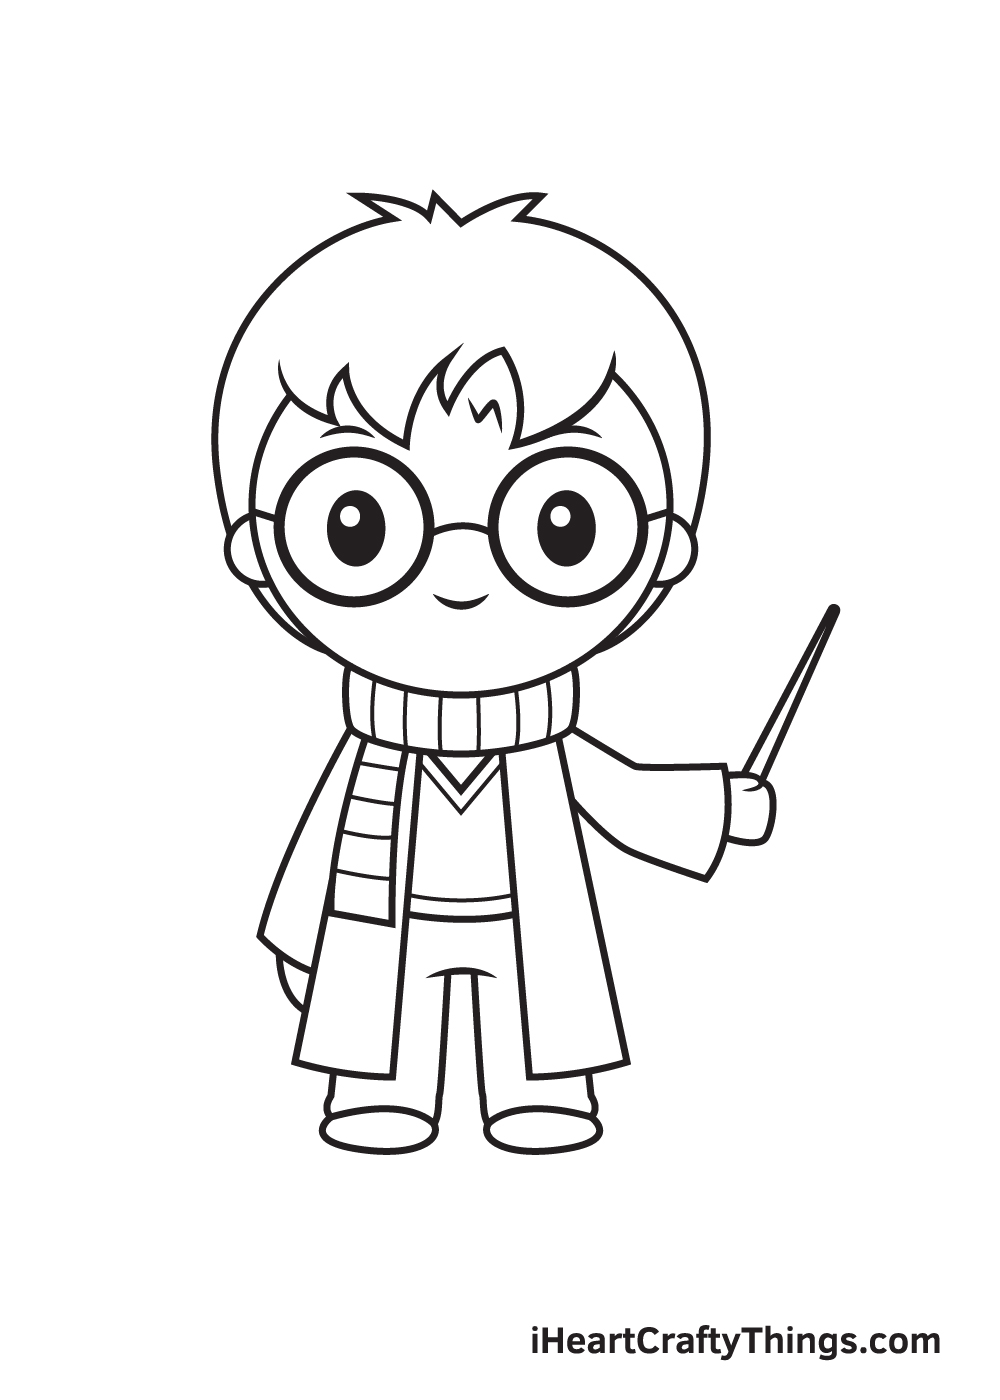 Harry Potter Drawing – Step 9